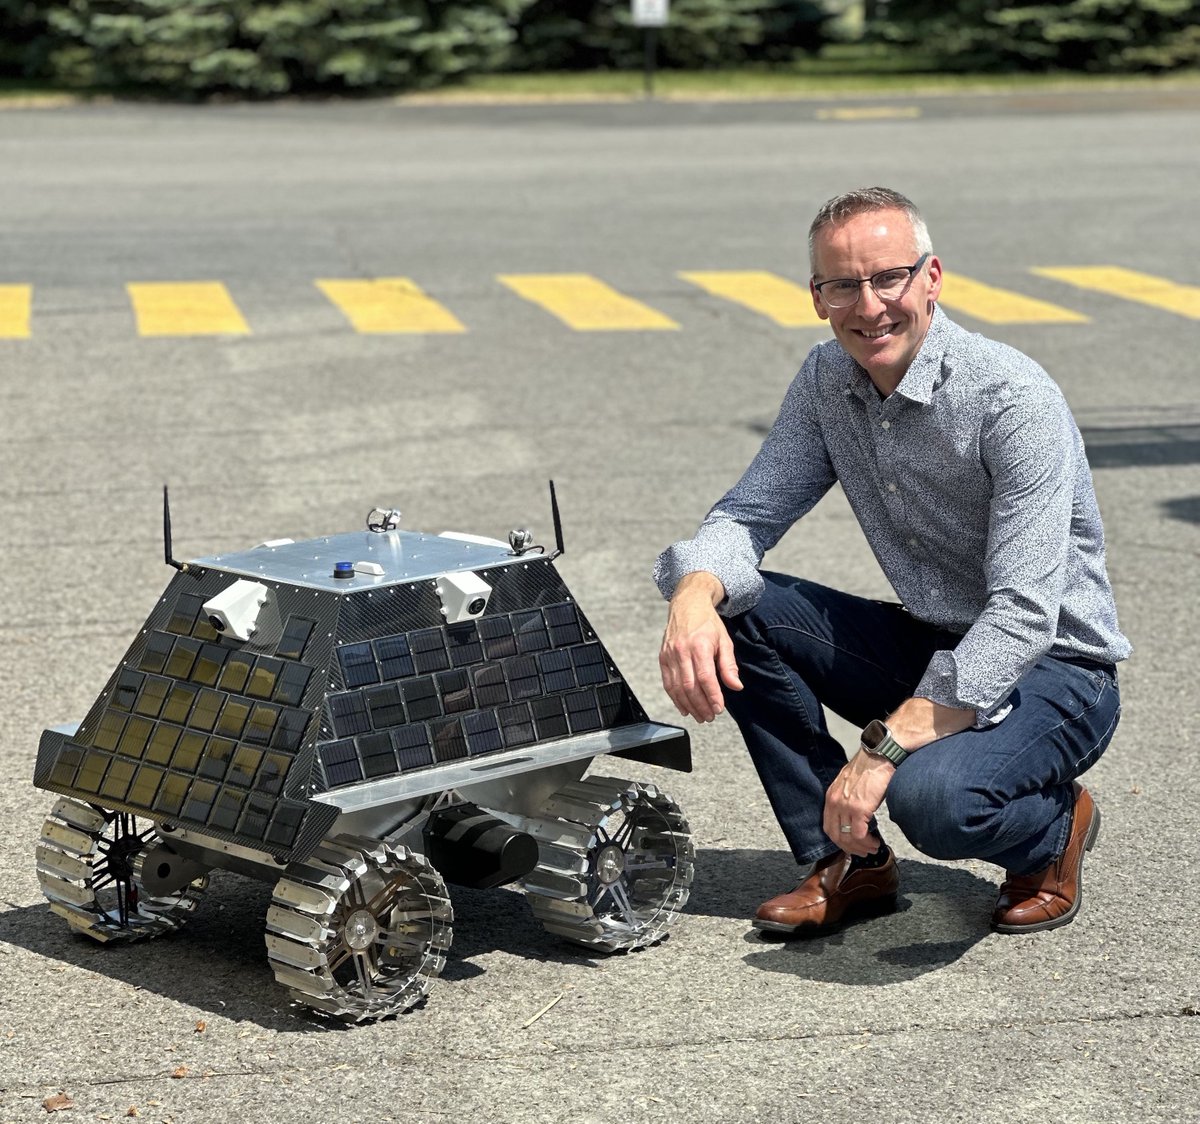 Today's the day: the 1st part of the Preliminary Design Review (PDR) focused on science, a major milestone in the development of the Canadian Lunar Rover! 🇨🇦#ToTheMoon #CdnScience #CdnSpace @Canadensys1 @csa_asc @WesternU